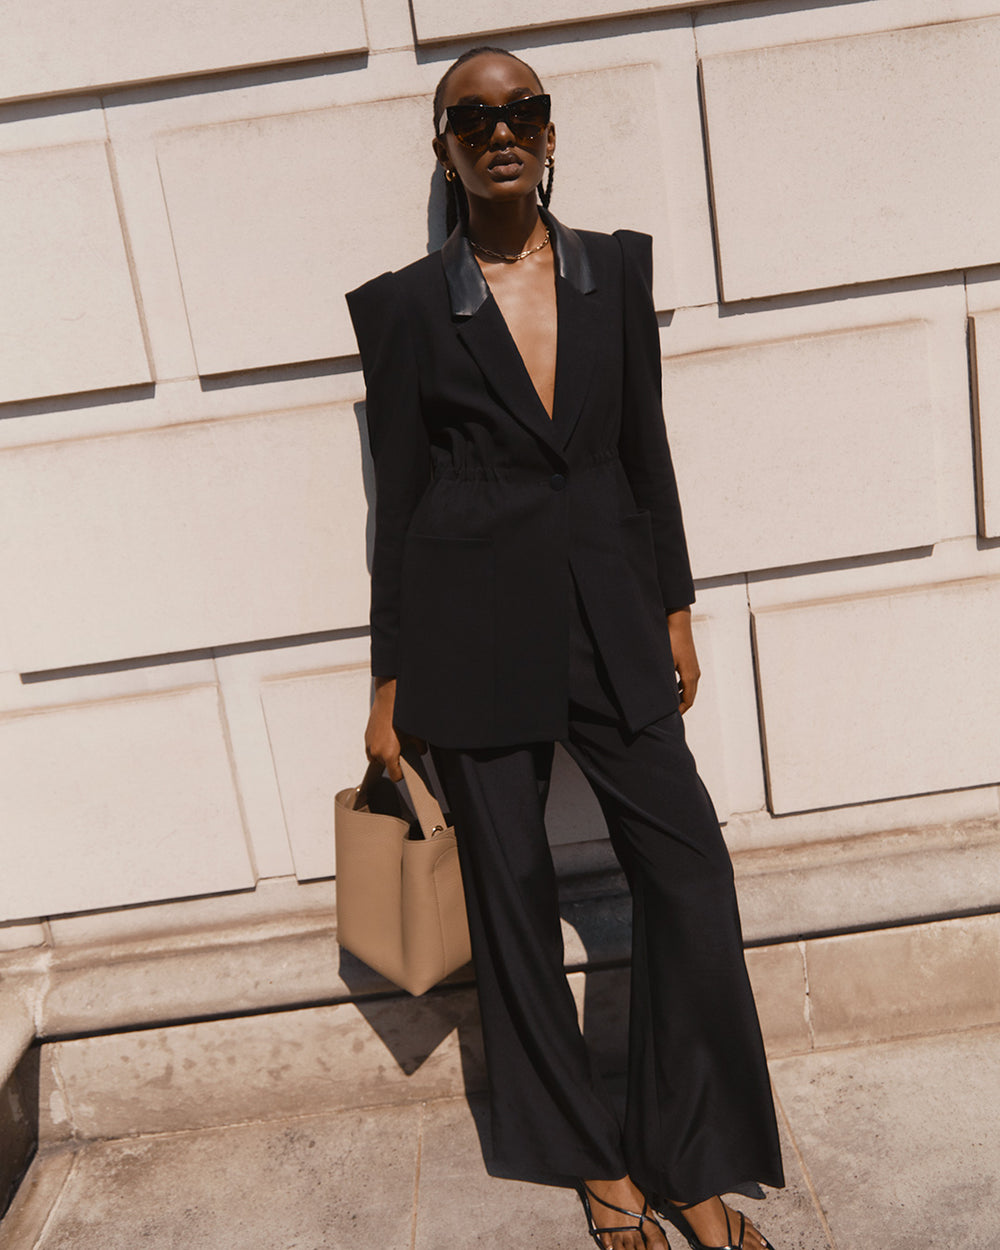 Woman in a suit standing against a wall with a handbag and sunglasses.